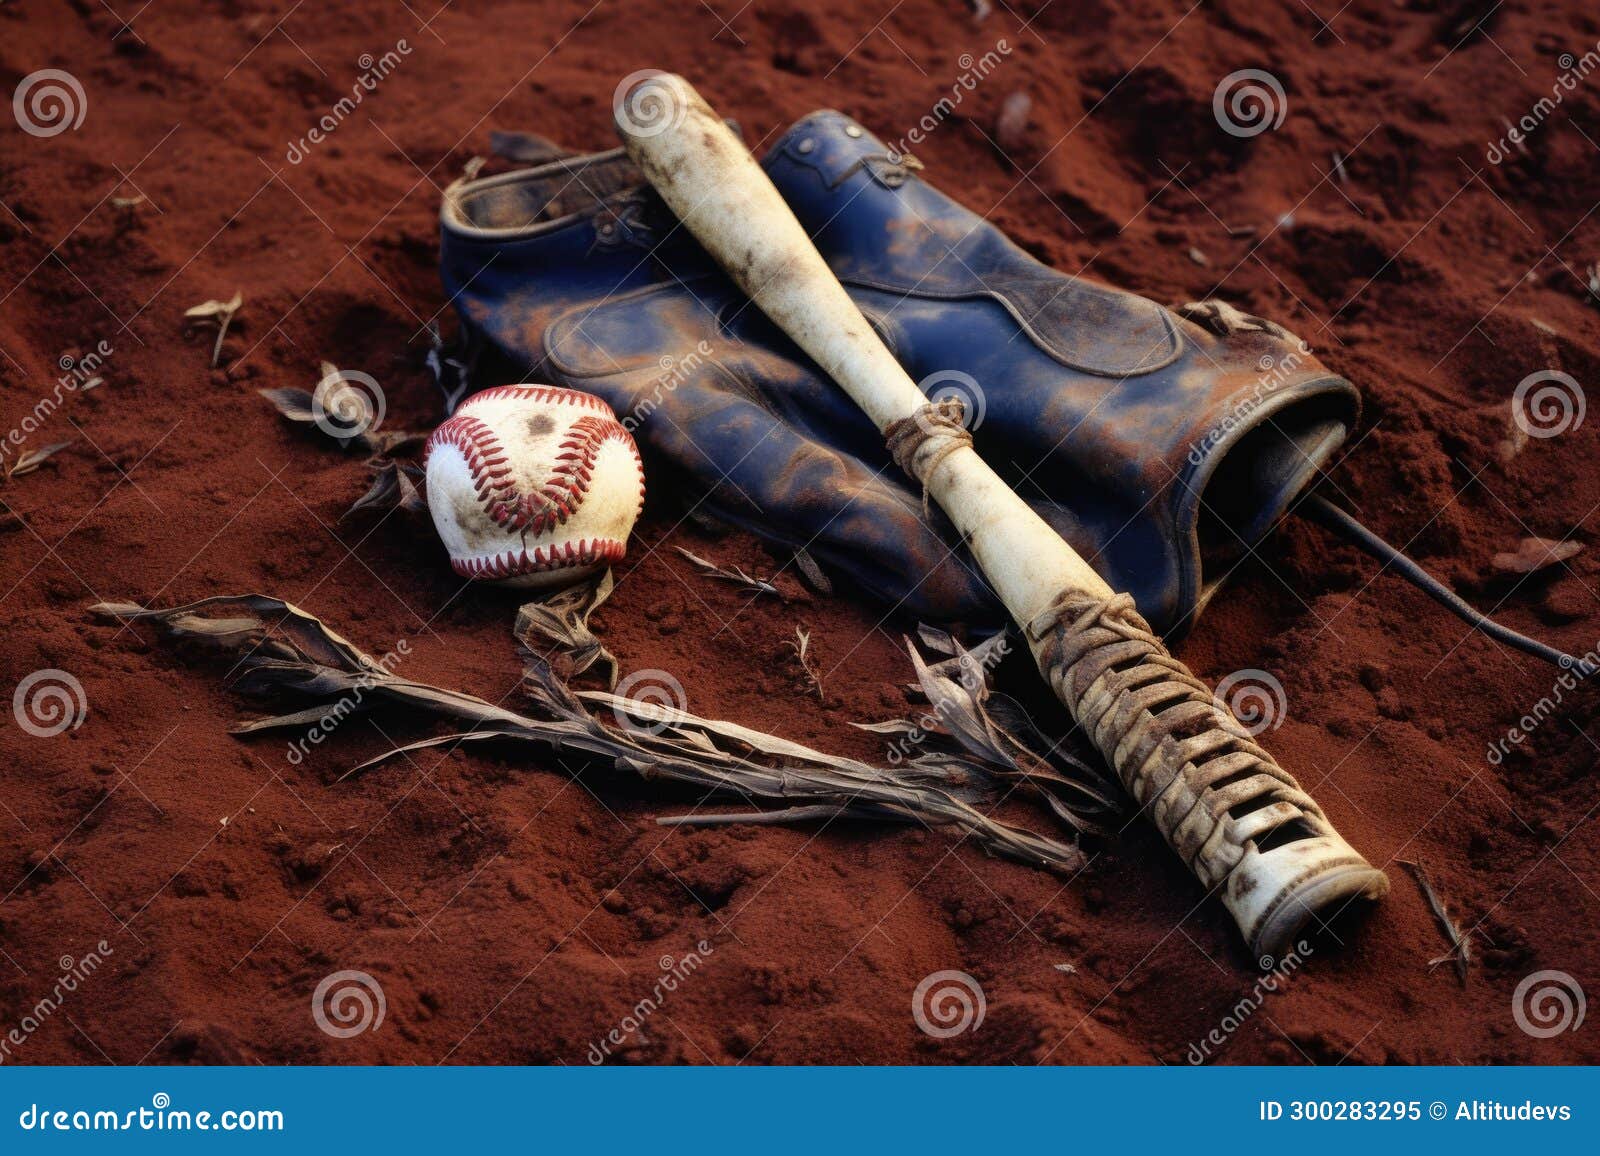 a t-ball bat and glove left on the field after a game